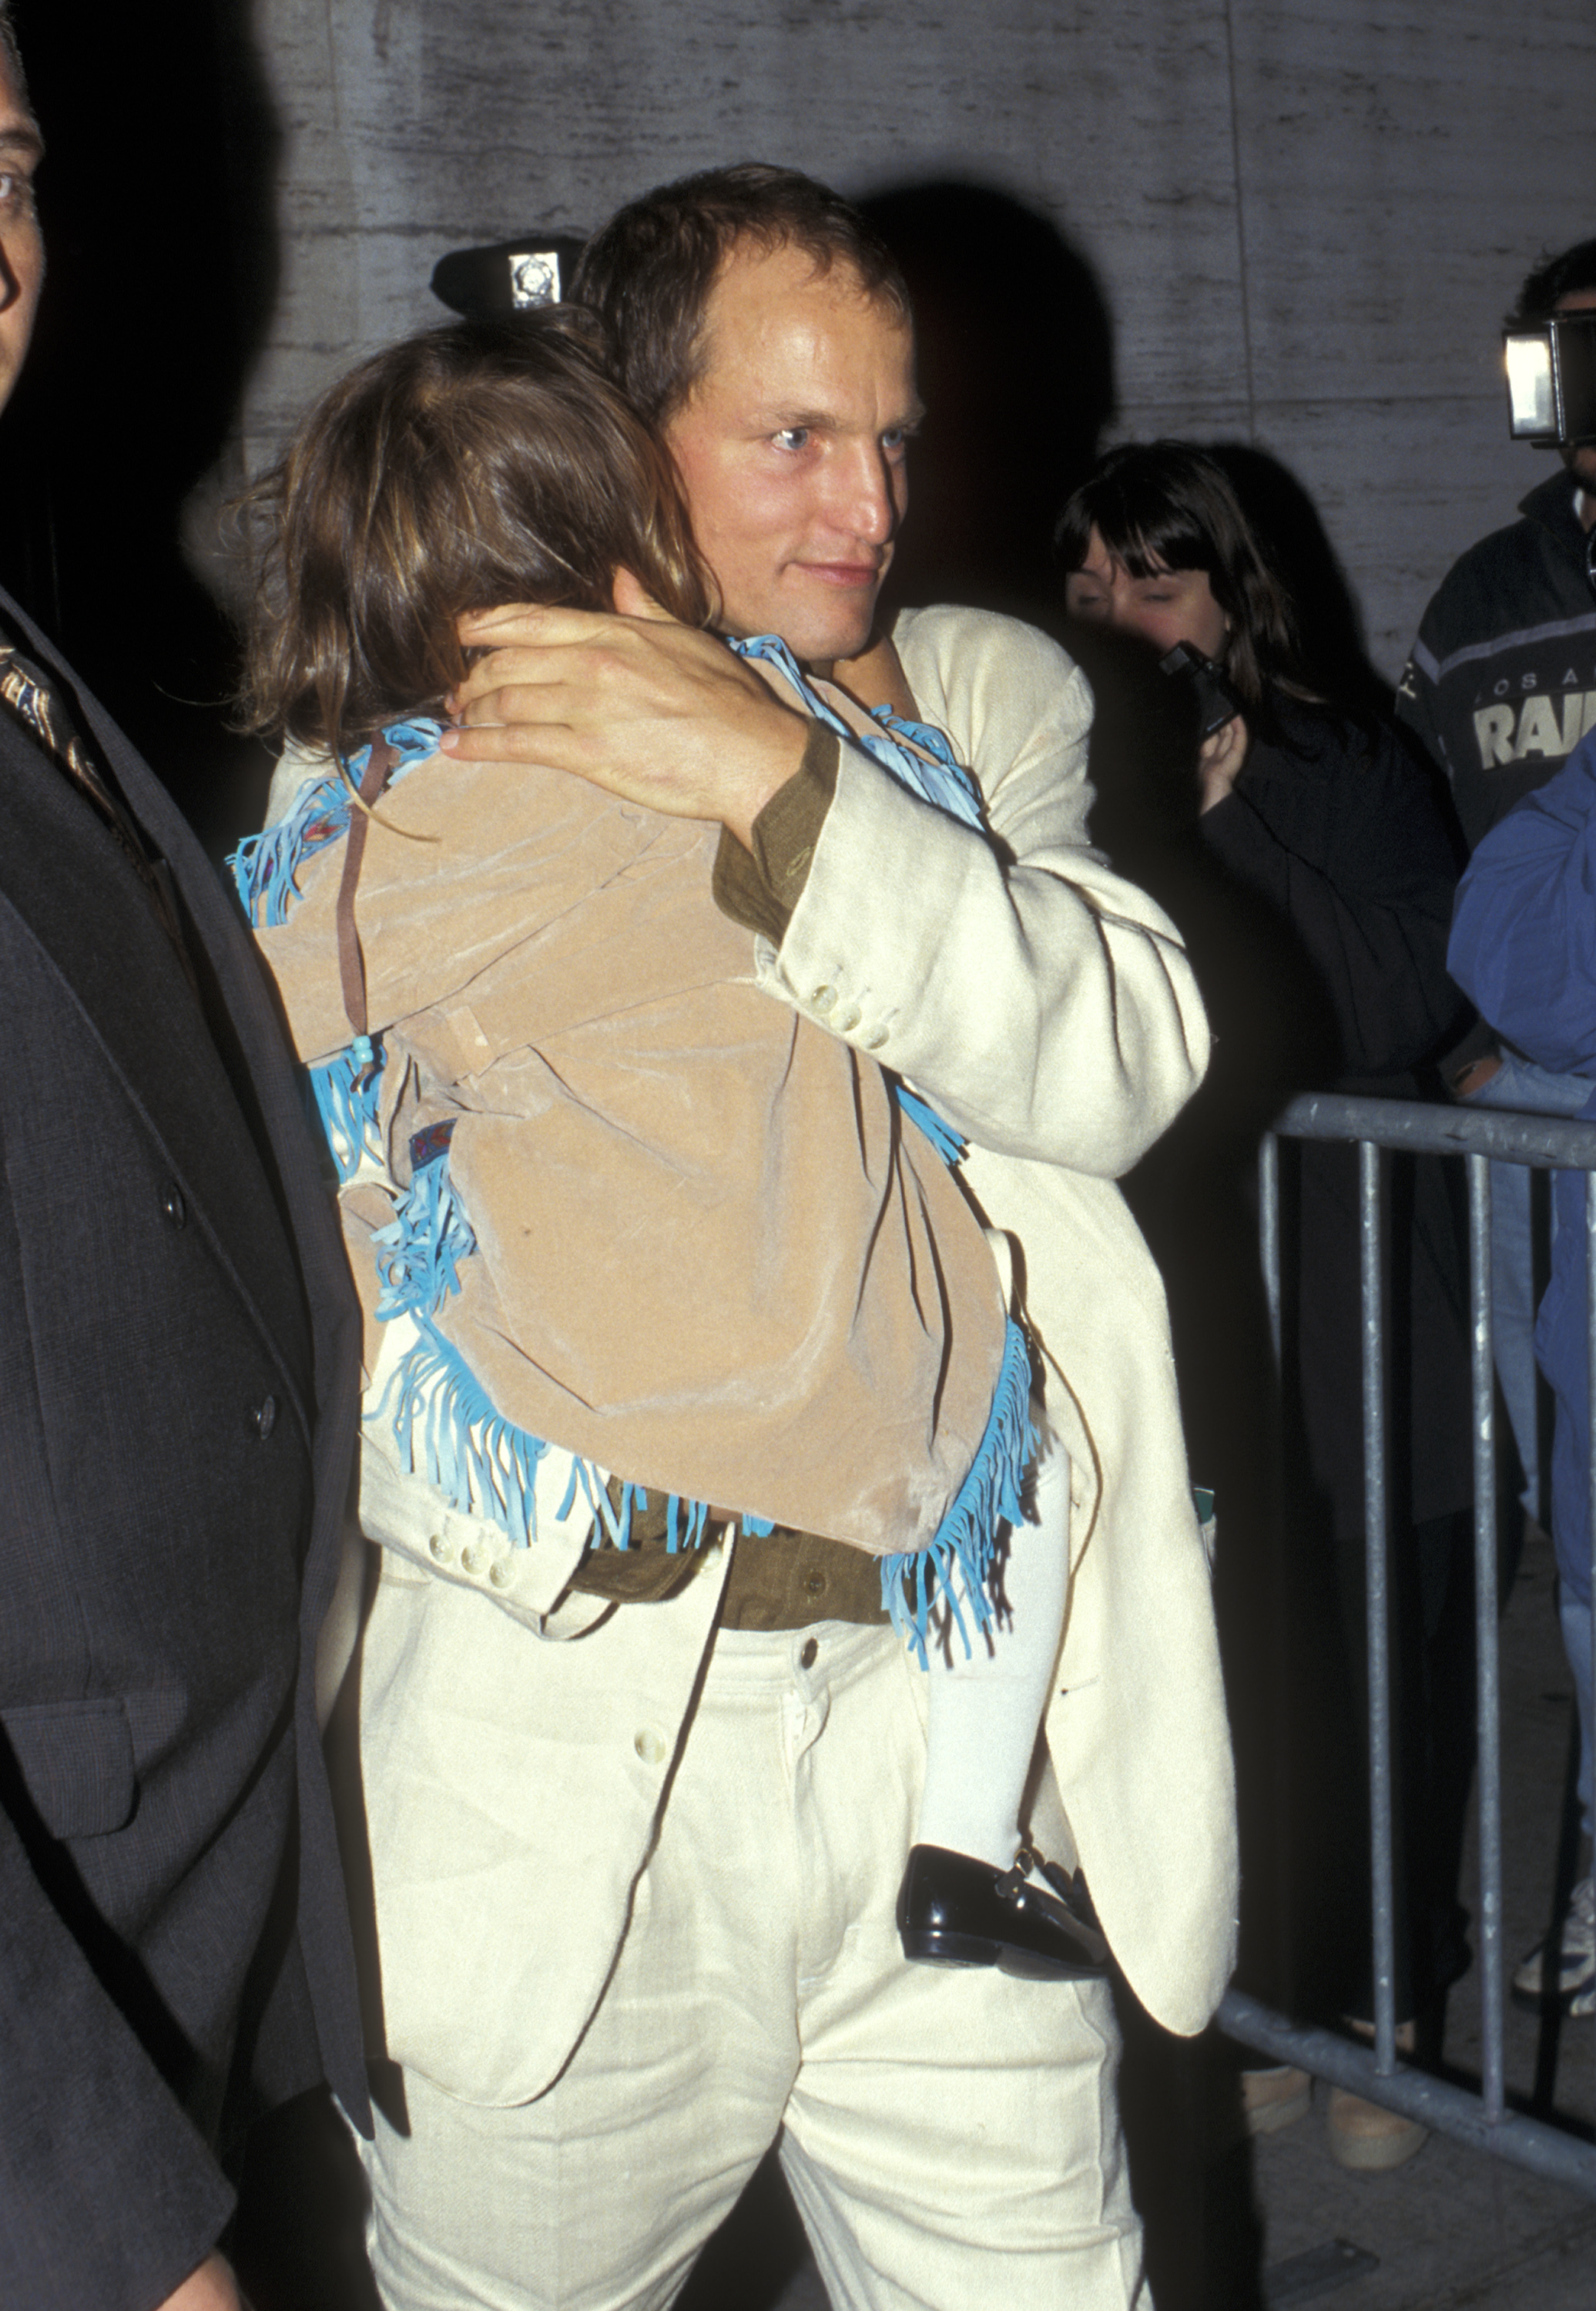 Woody Harrelson and one of his children at the New York Film Festival premiere of "The People vs. Larry Flynt," on October 13, 1996 | Source: Getty Images